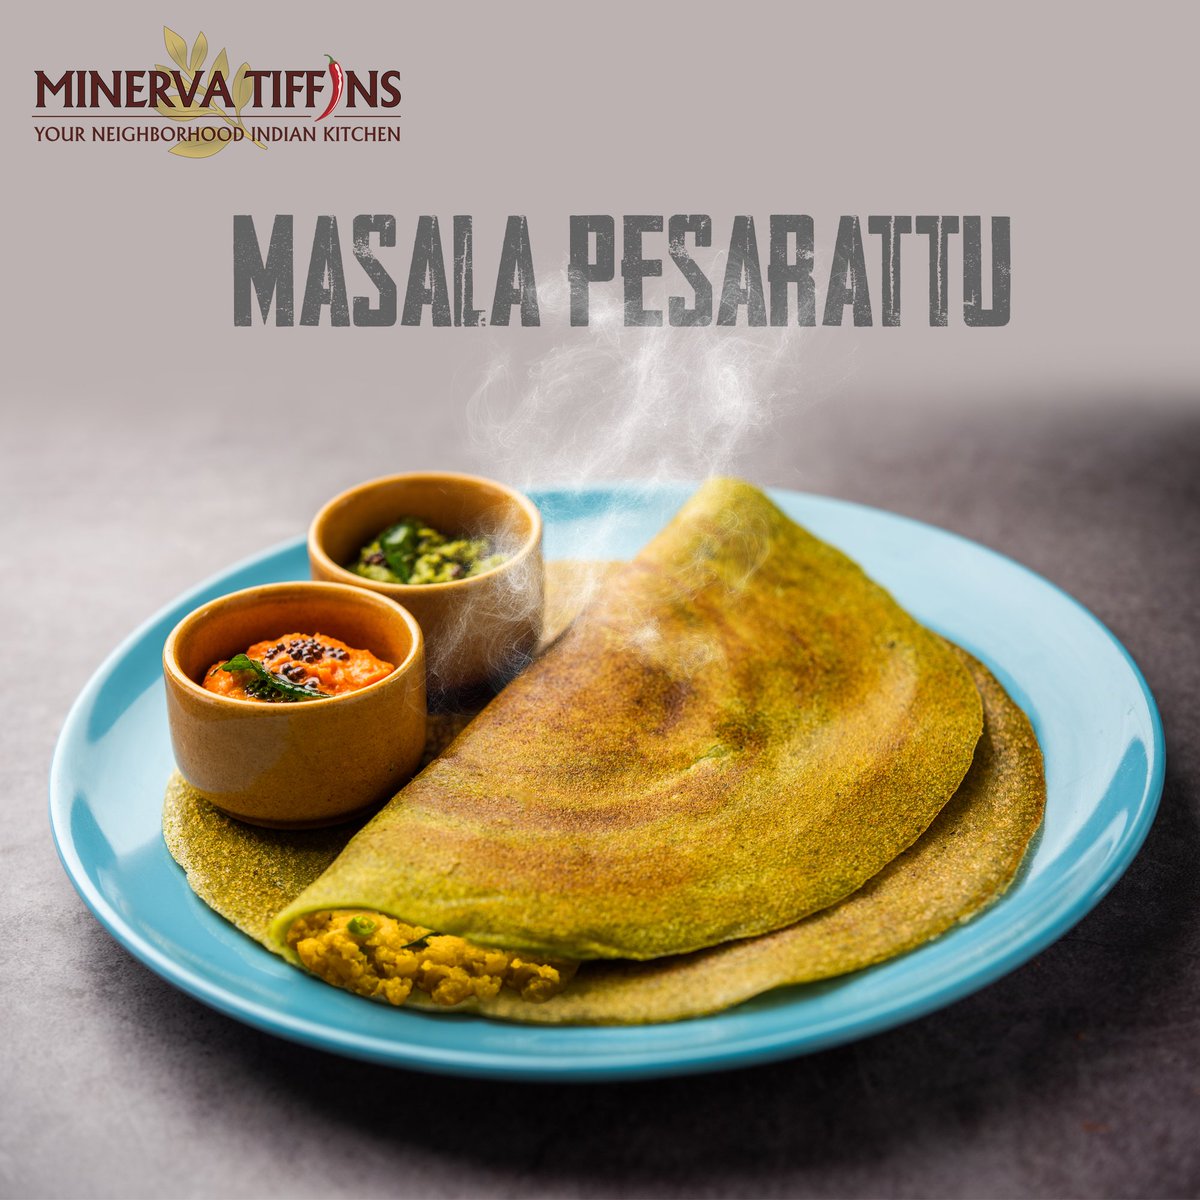 Start your day with Masala Pesarattu is a wholesome and nutritious choice for your breakfast and brunch.
For more details Visit📍16 Lebovic Ave, Scarborough, ON M1L 4V9
.
.
.
#minervatiffins #dinein #cateringservice #masalapesarattu #pesarattu #healthyfood #homefood #breakfast